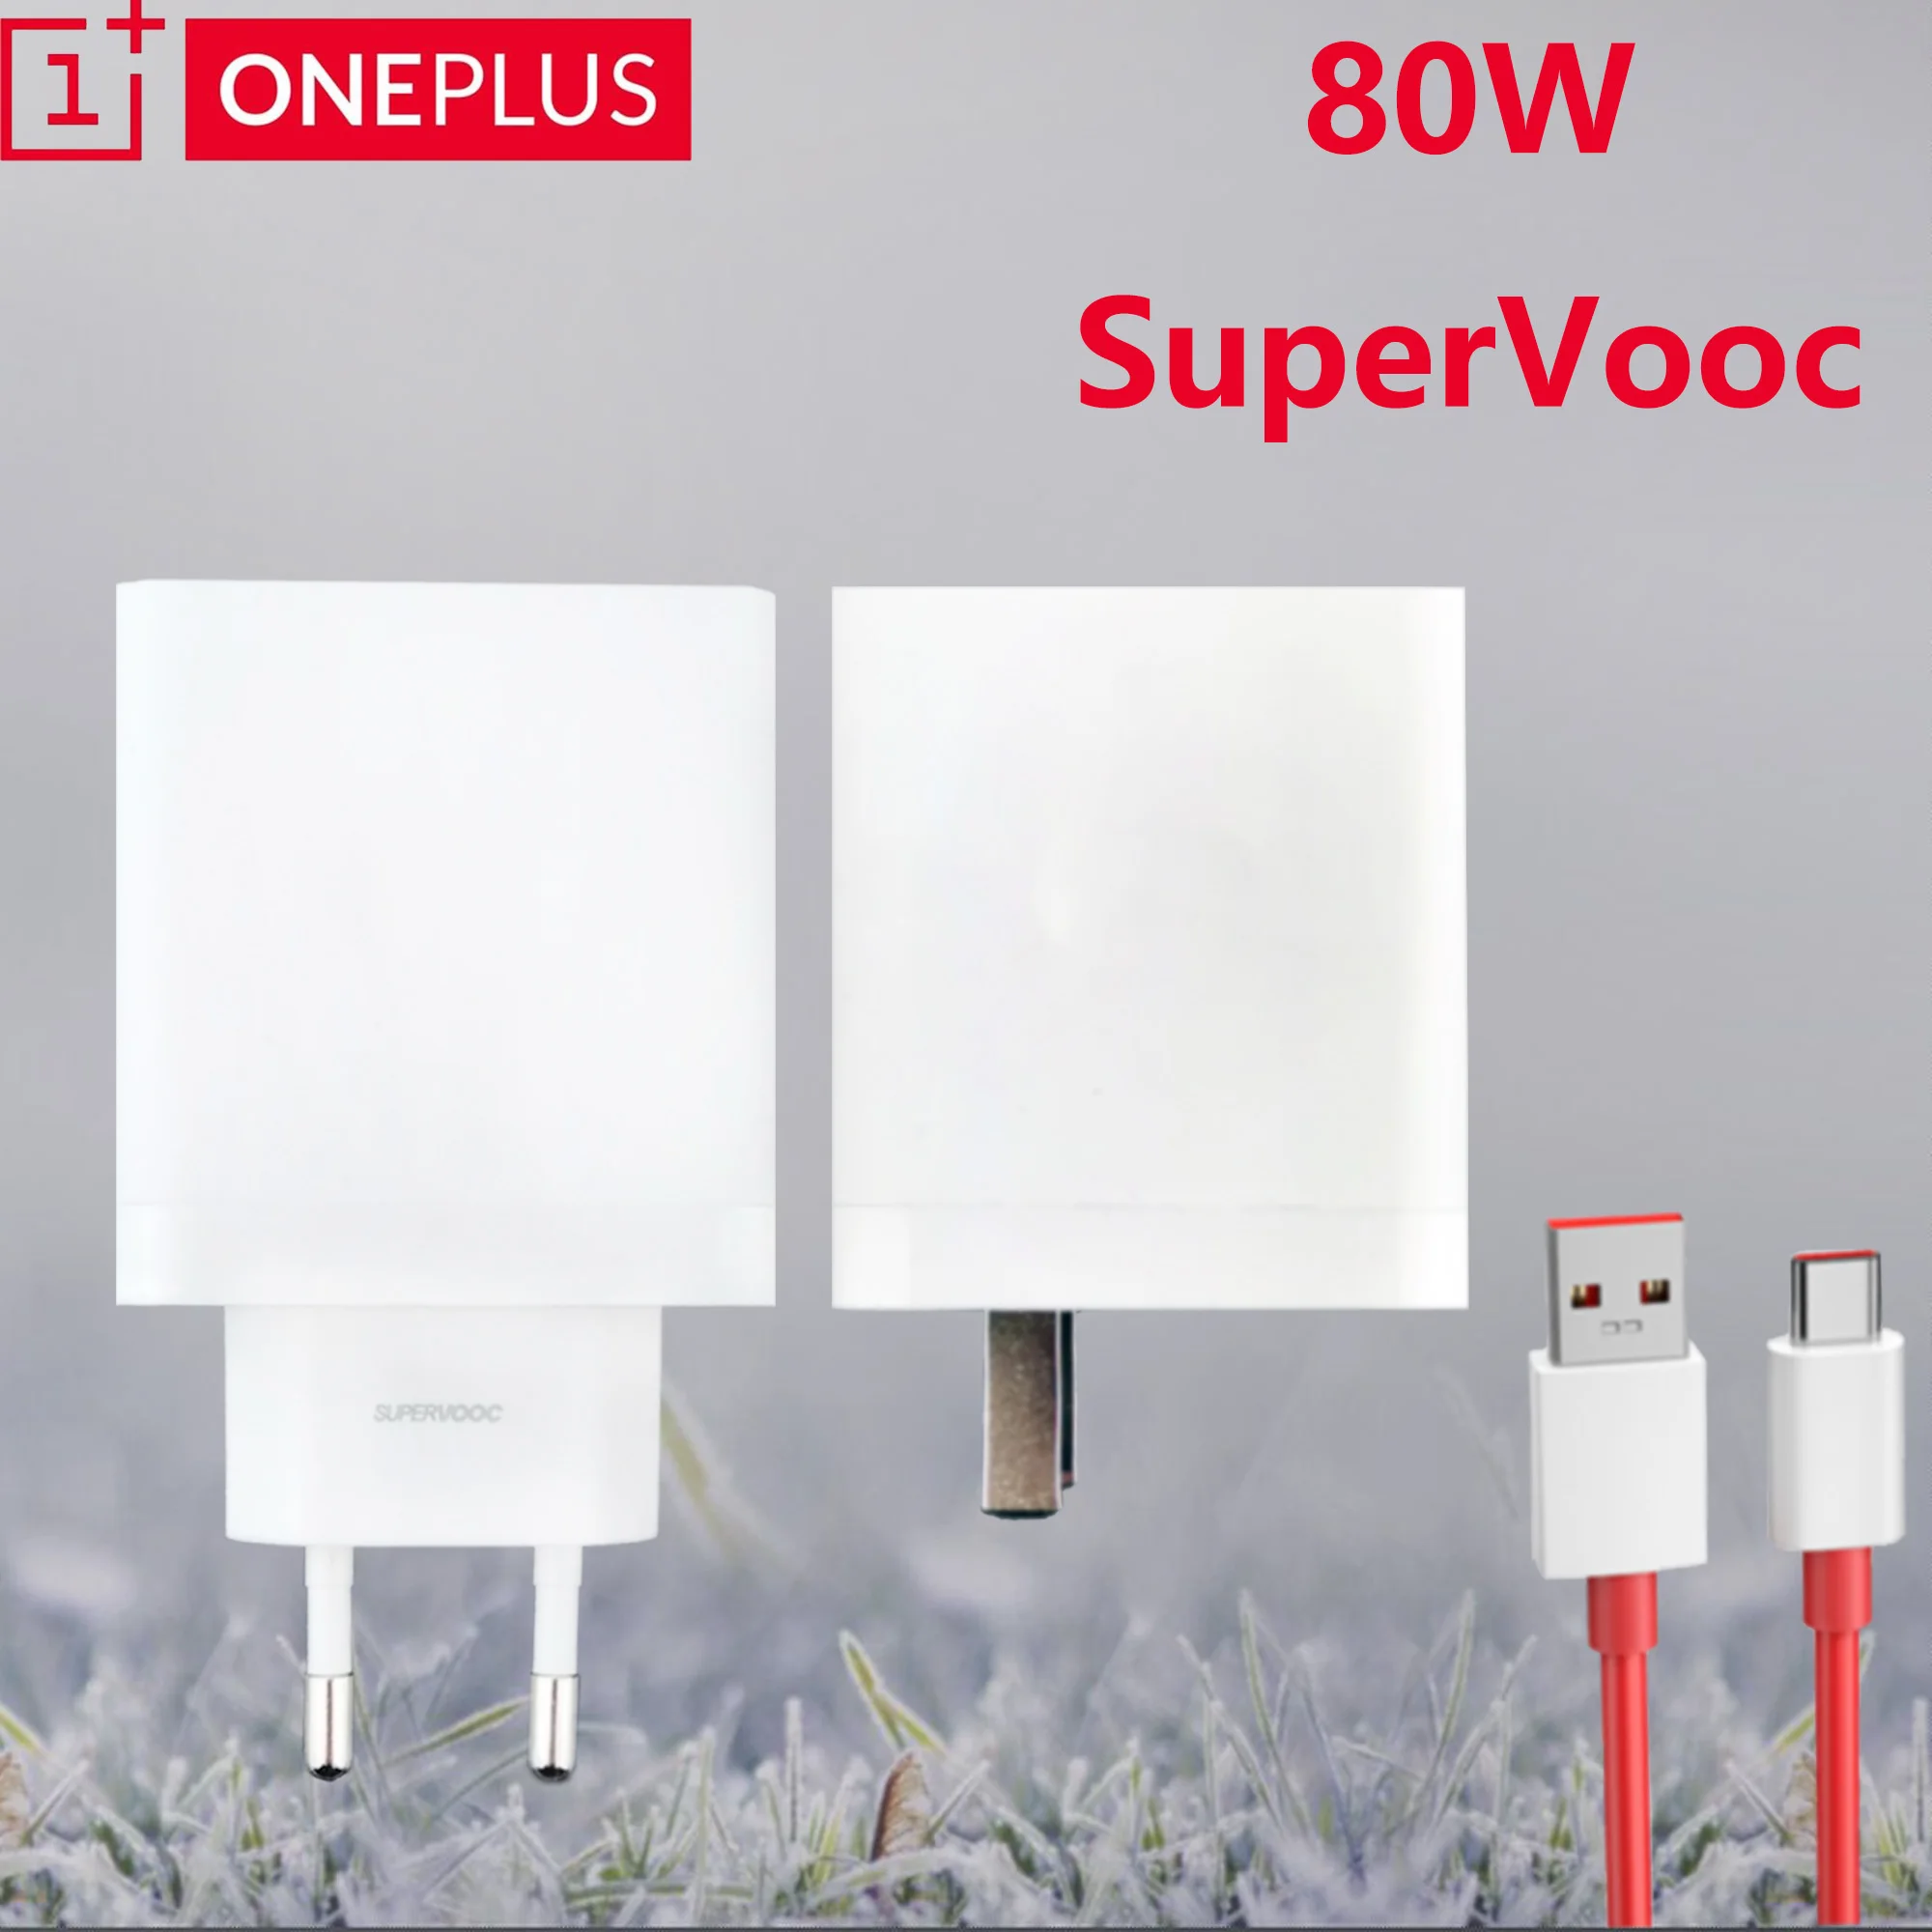 

OnePlus 80W SuperVooc Charger Original Fast Travel Warp Charge Power Adapter Usb C Cable For 1 One Plus 10 Pro R Ace Nord 2 9 9T